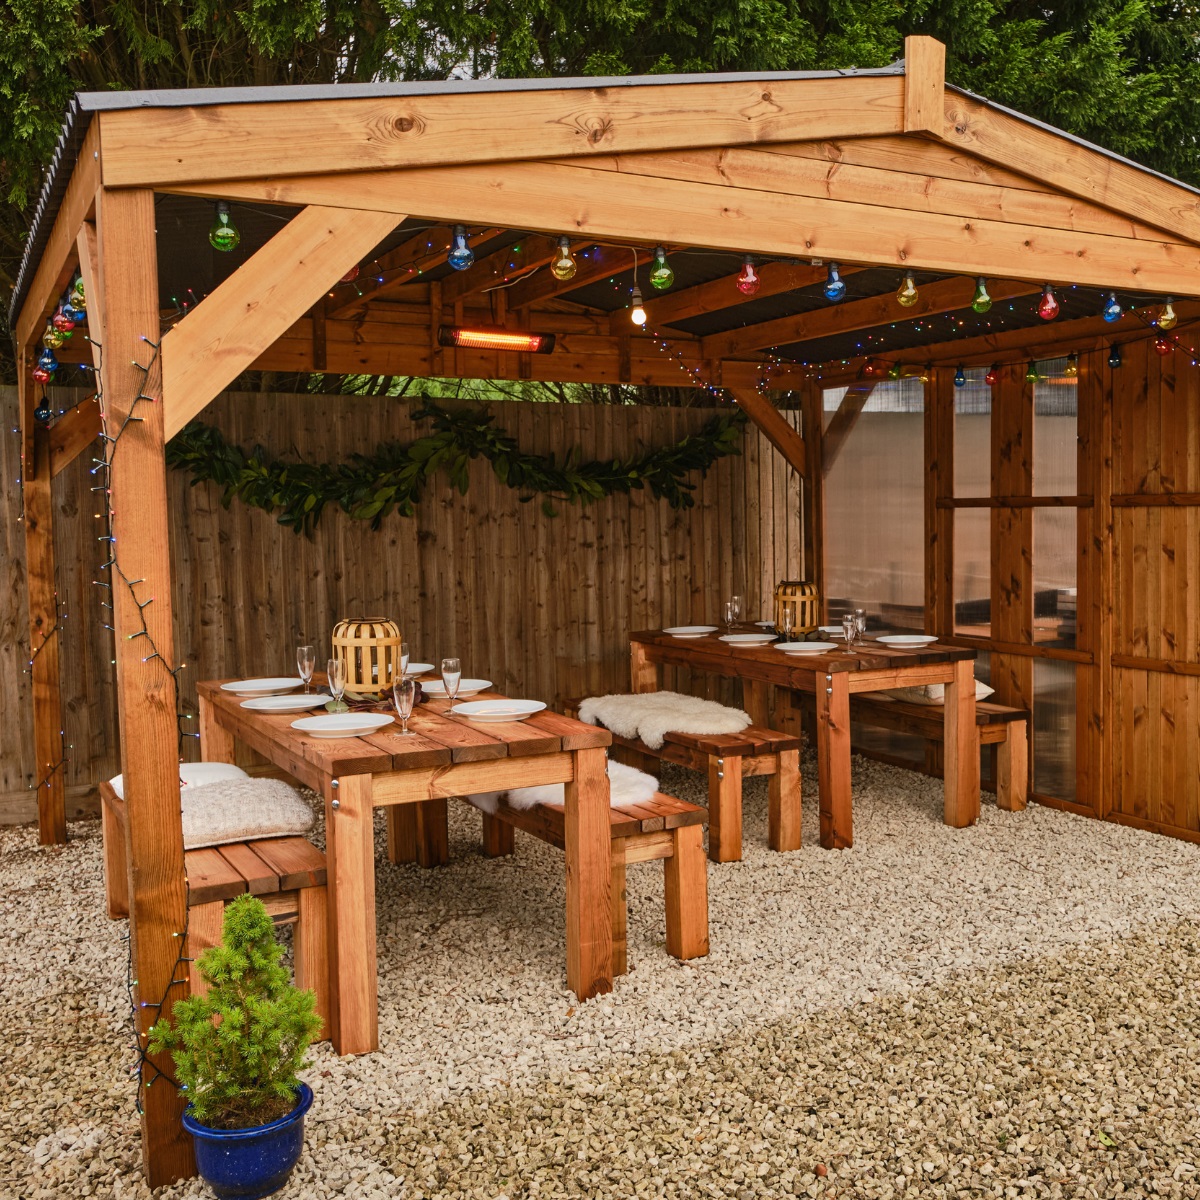 A square wooden gazebo with apex waterproof roof with 2 rectangular wooden tables underneath seating 12 dressed for christmas dinner